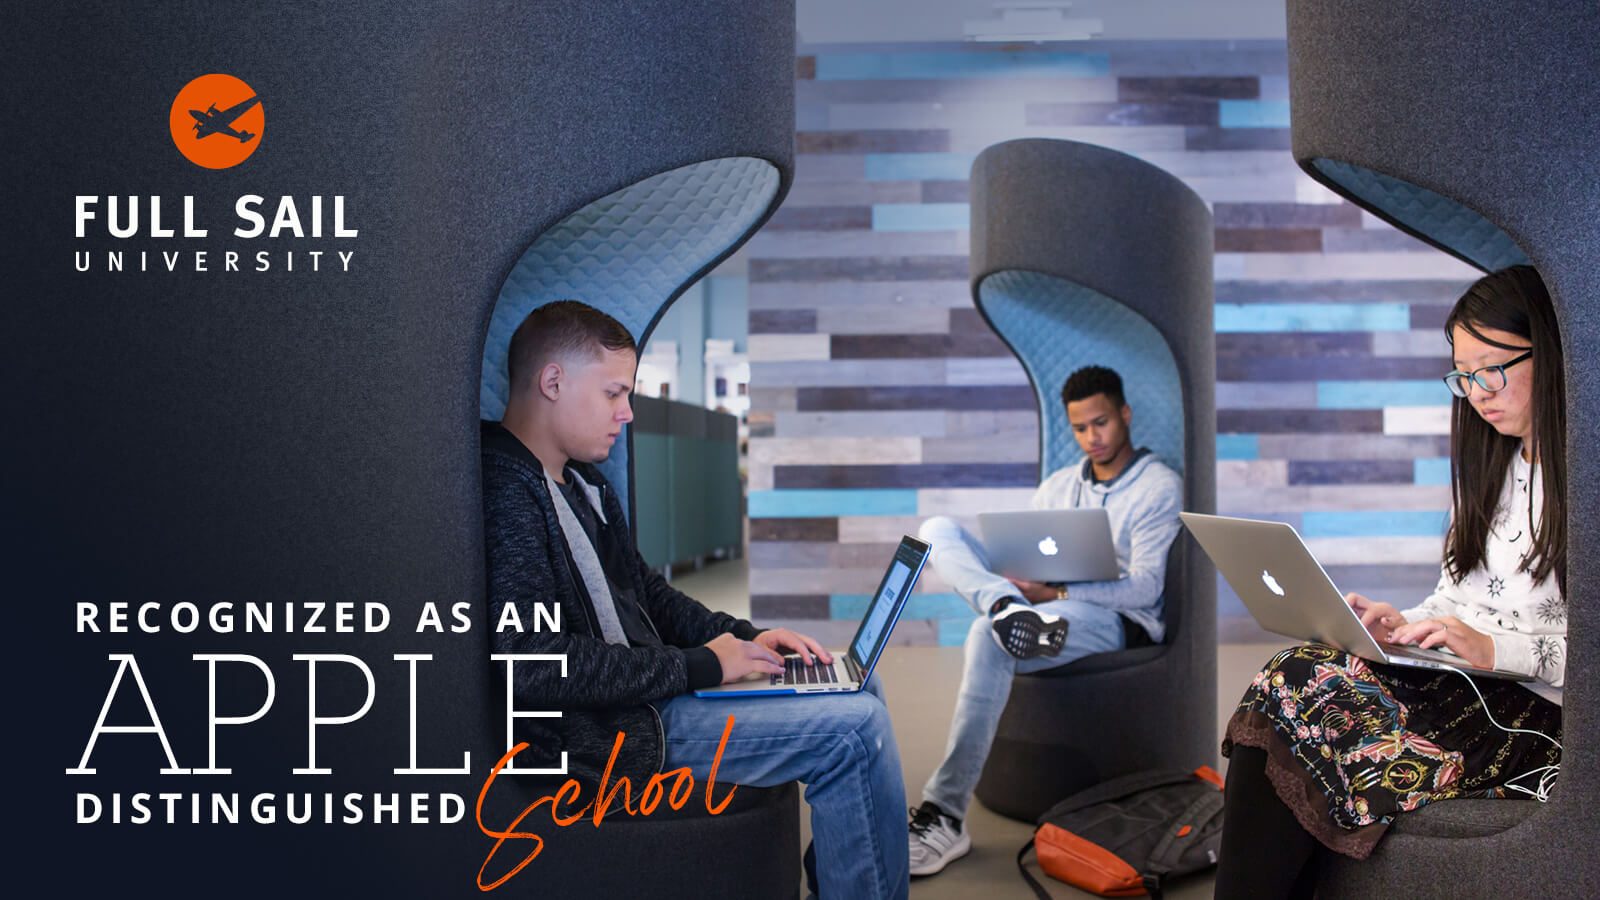 Three students using MacBooks sit on gray and blue chairs. The Full Sail logo is in the image’s top-left corner with the words “Recognized as an Apple Distinguished School” beneath it